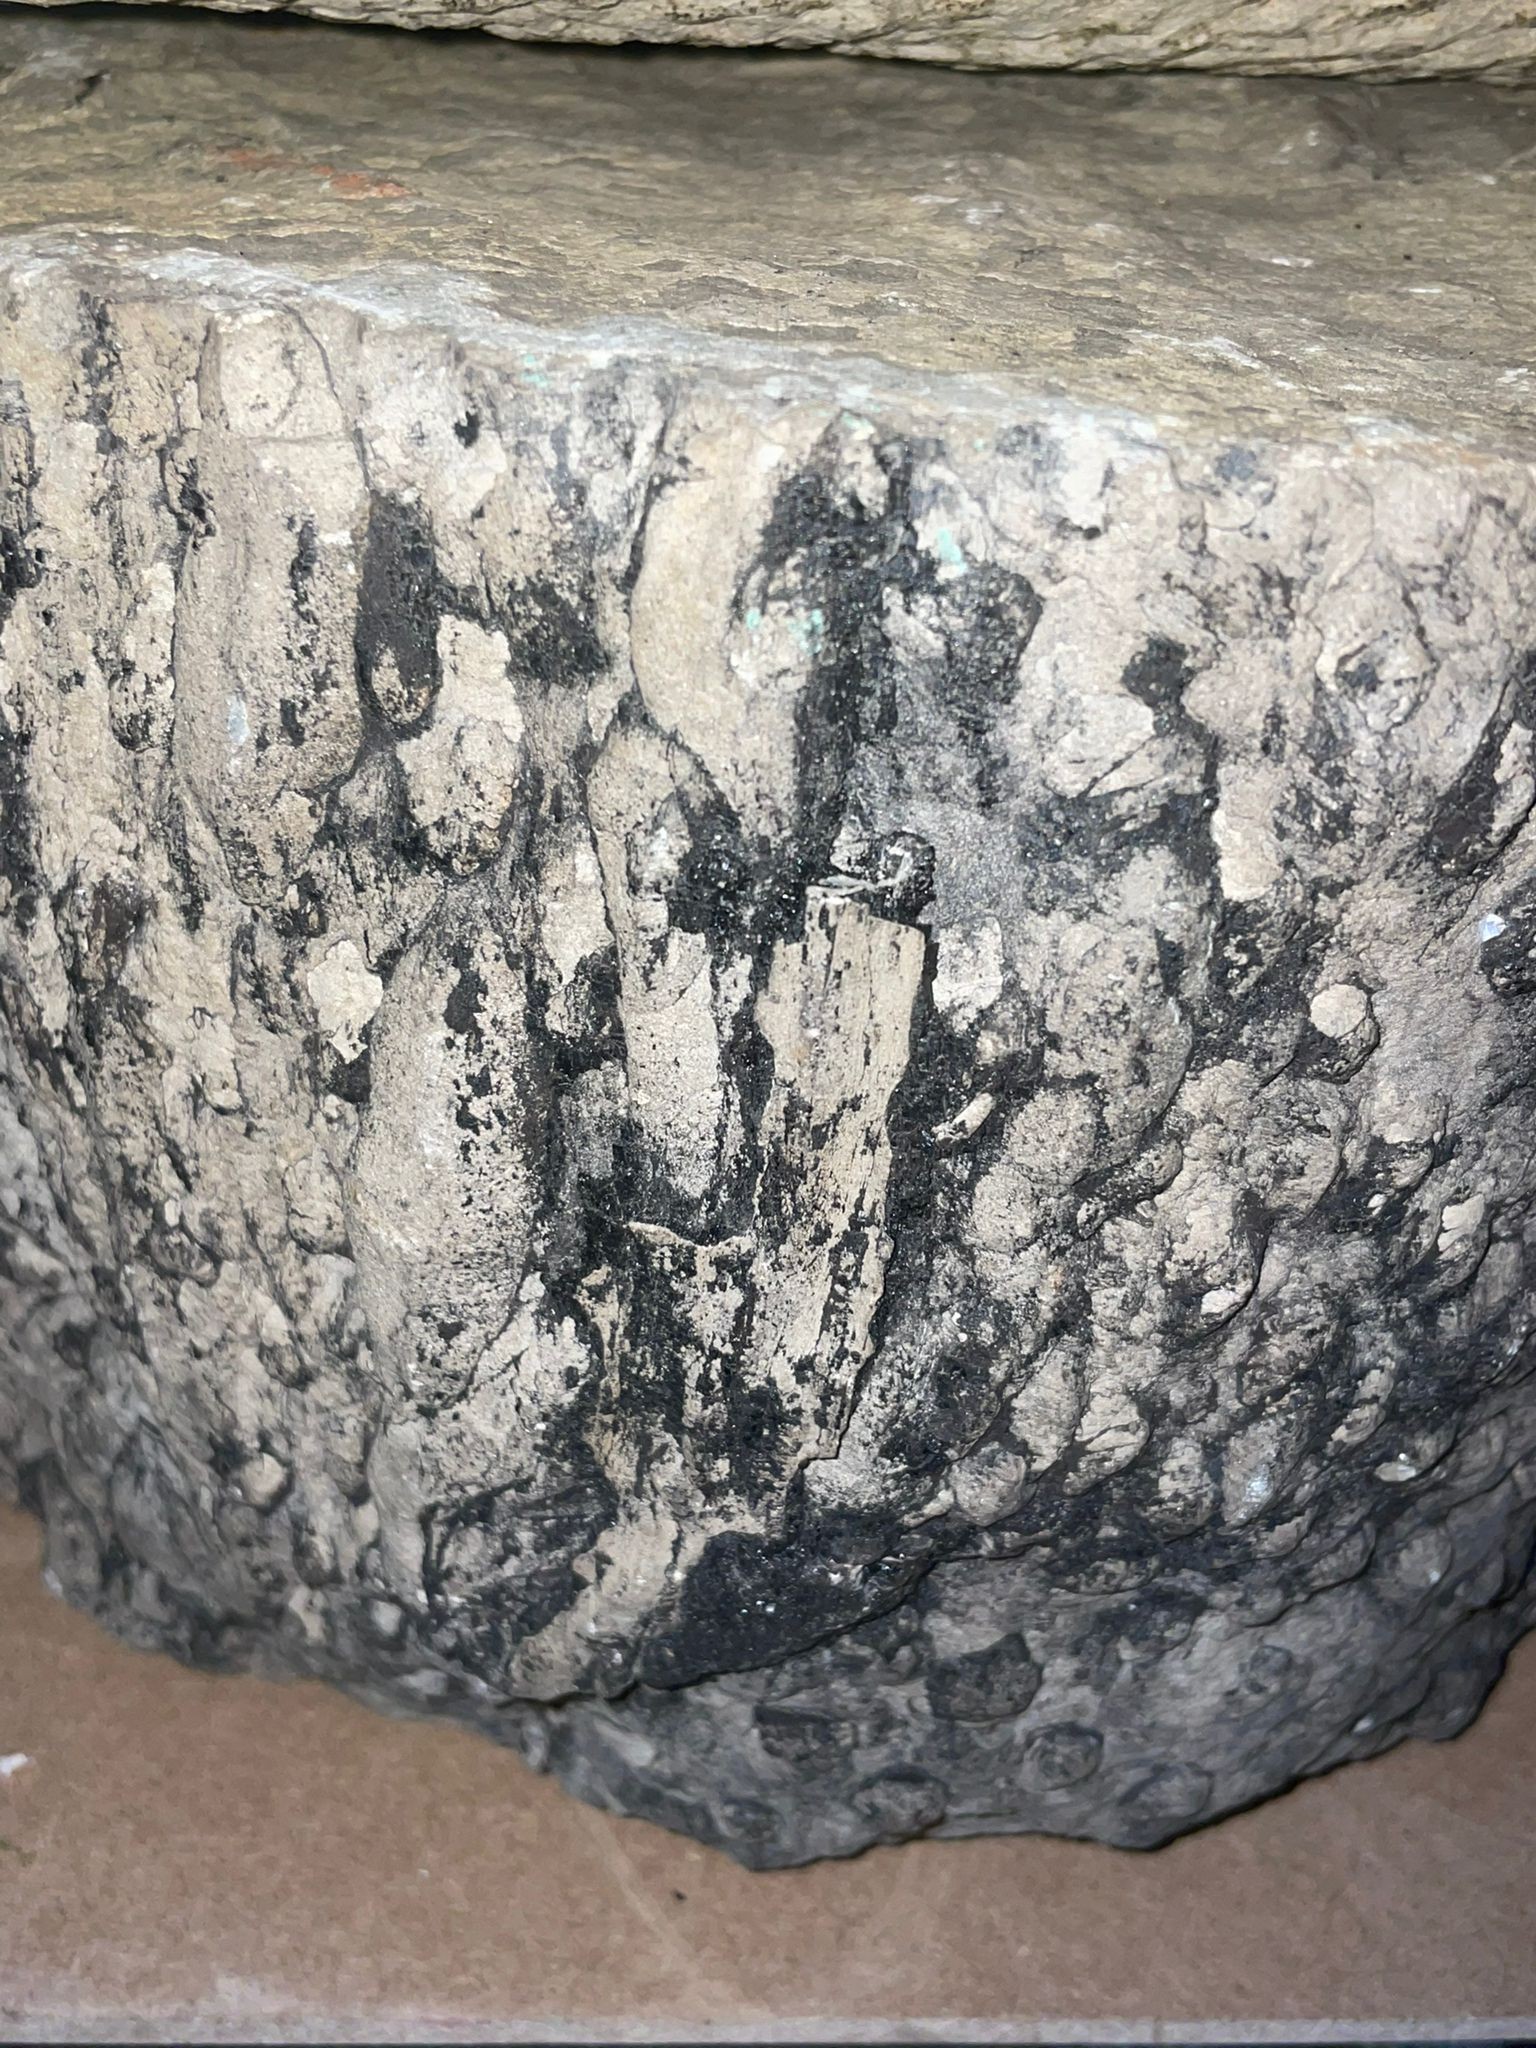 A fossil section of tree trunk approx. 15 inches across, with a fossilized branch section approx. 14